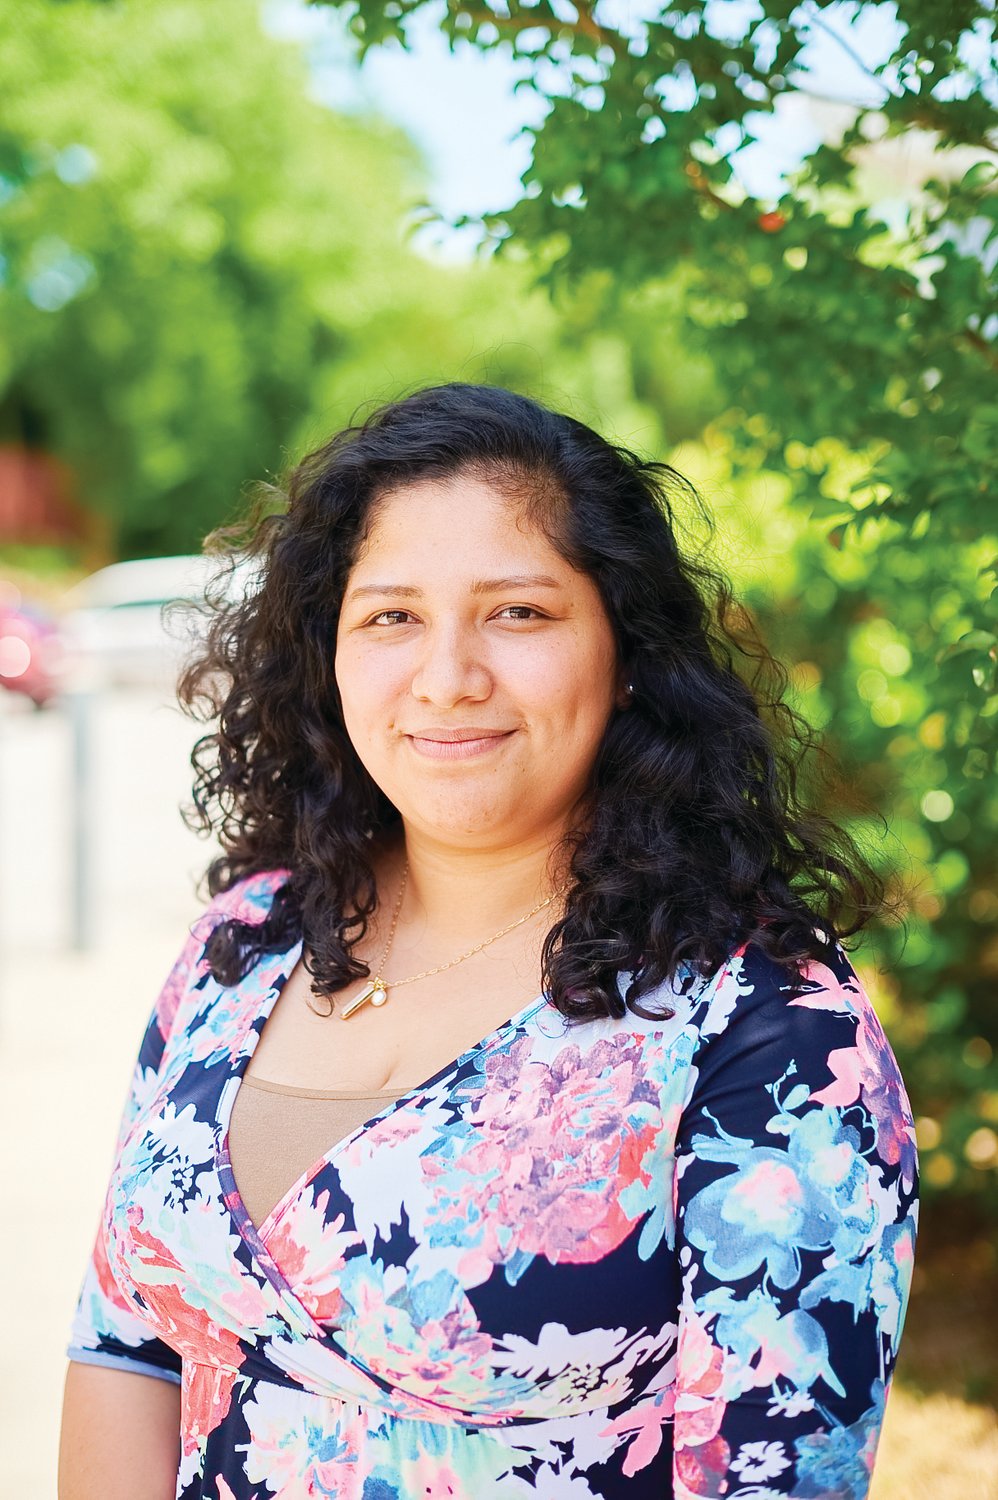 Hannia Benitez is the Hispanic Liaison’s deputy director for the nonprofit’s new Sanford satellite office, located at 215 Bracken St. She lives in Siler City and has been on the Liaison’s staff since January.